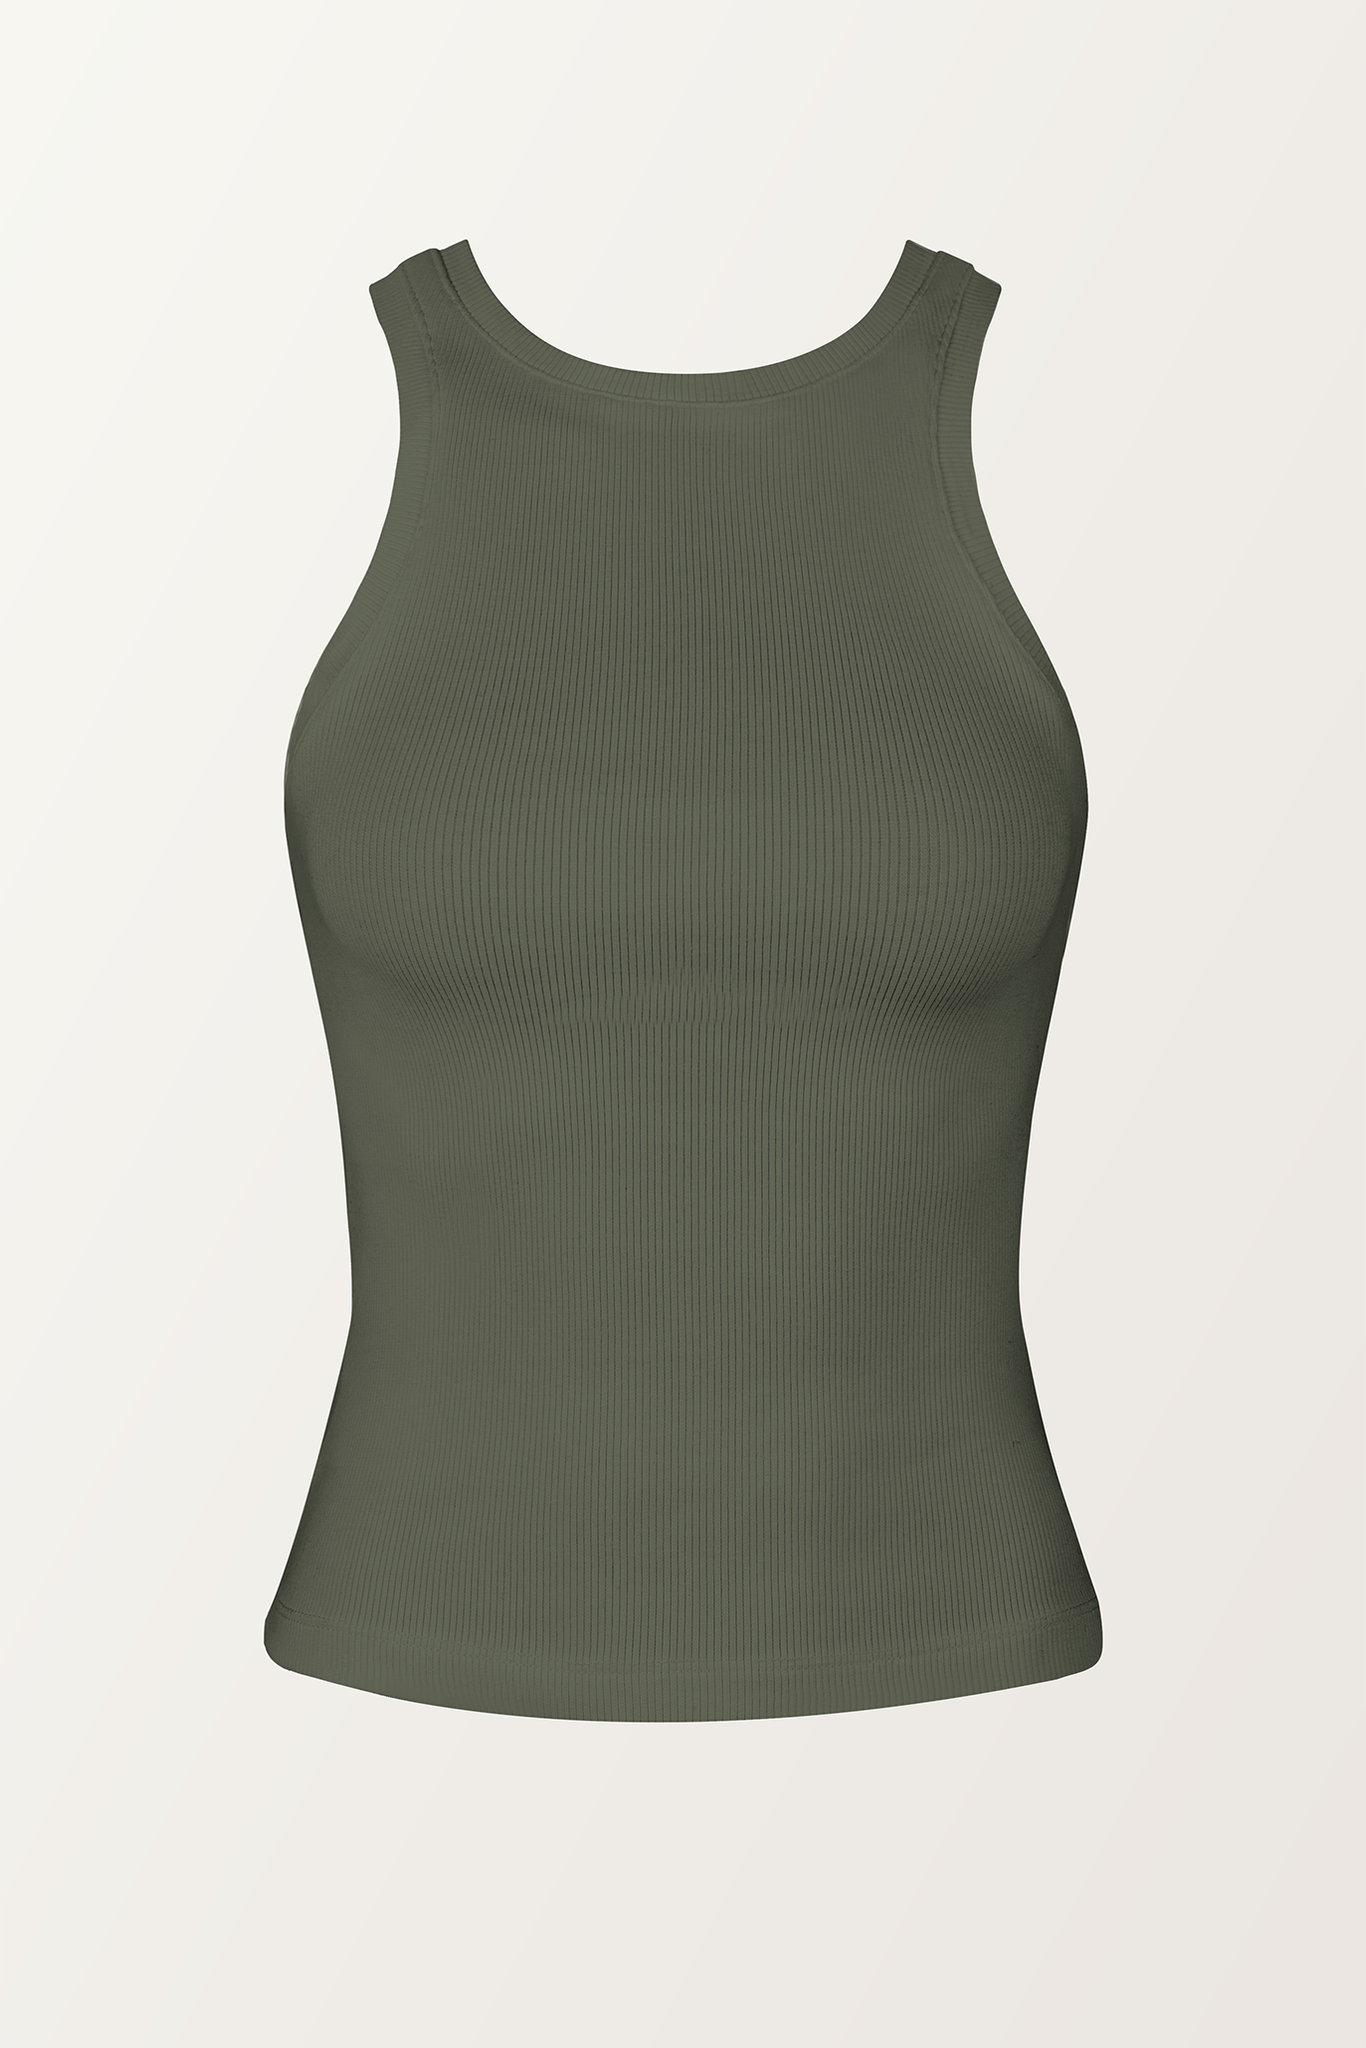 PIXIE WON'T PLAY LARA TANK TOP RIBBED KHAKI ORGANIC COTTON SUSTAINABLE FASHION WEAR WITHOUT BRA LUXURY SLEEVELESS STYLISH COMFORTABLE BREATHABLE FABRIC VERSATILE RELAXED FIT SOFT TRENDY SUMMER AUTUMN WINTER SPRING WEAR CASUAL OUTFIT WORKOUT LAYERING VARIOUS COLORS FASHIONABLE MUST-HAVE